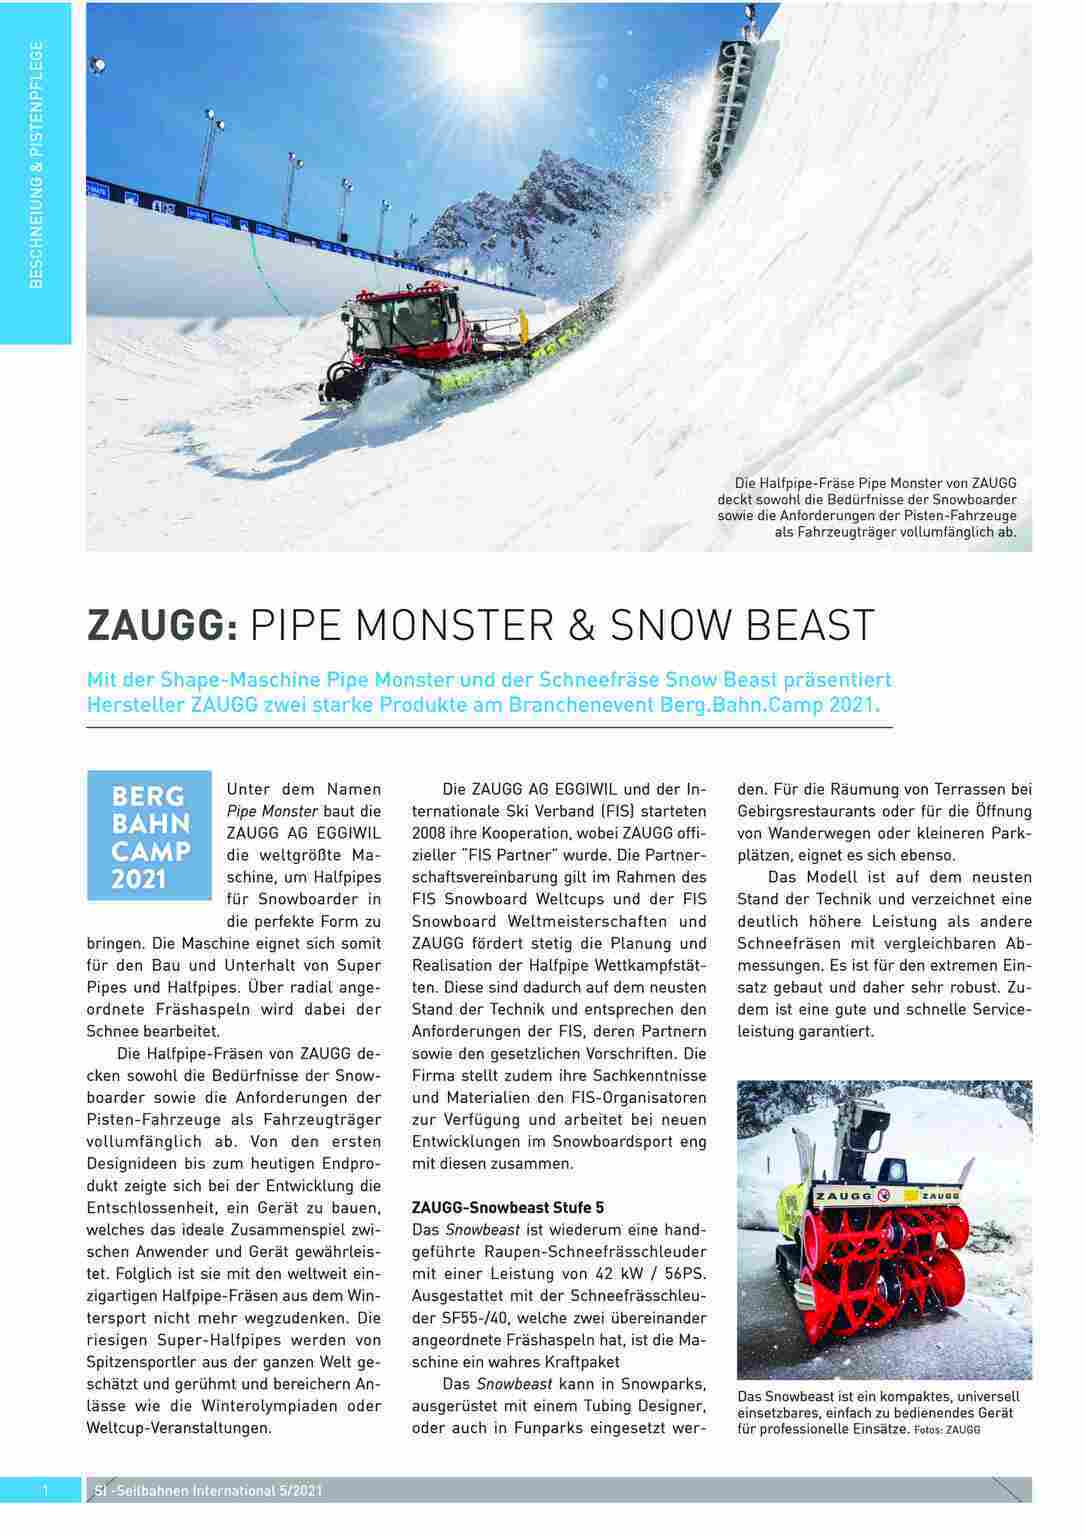 SI Seilbahnen International: Article Pipe Monster and Snowbeast